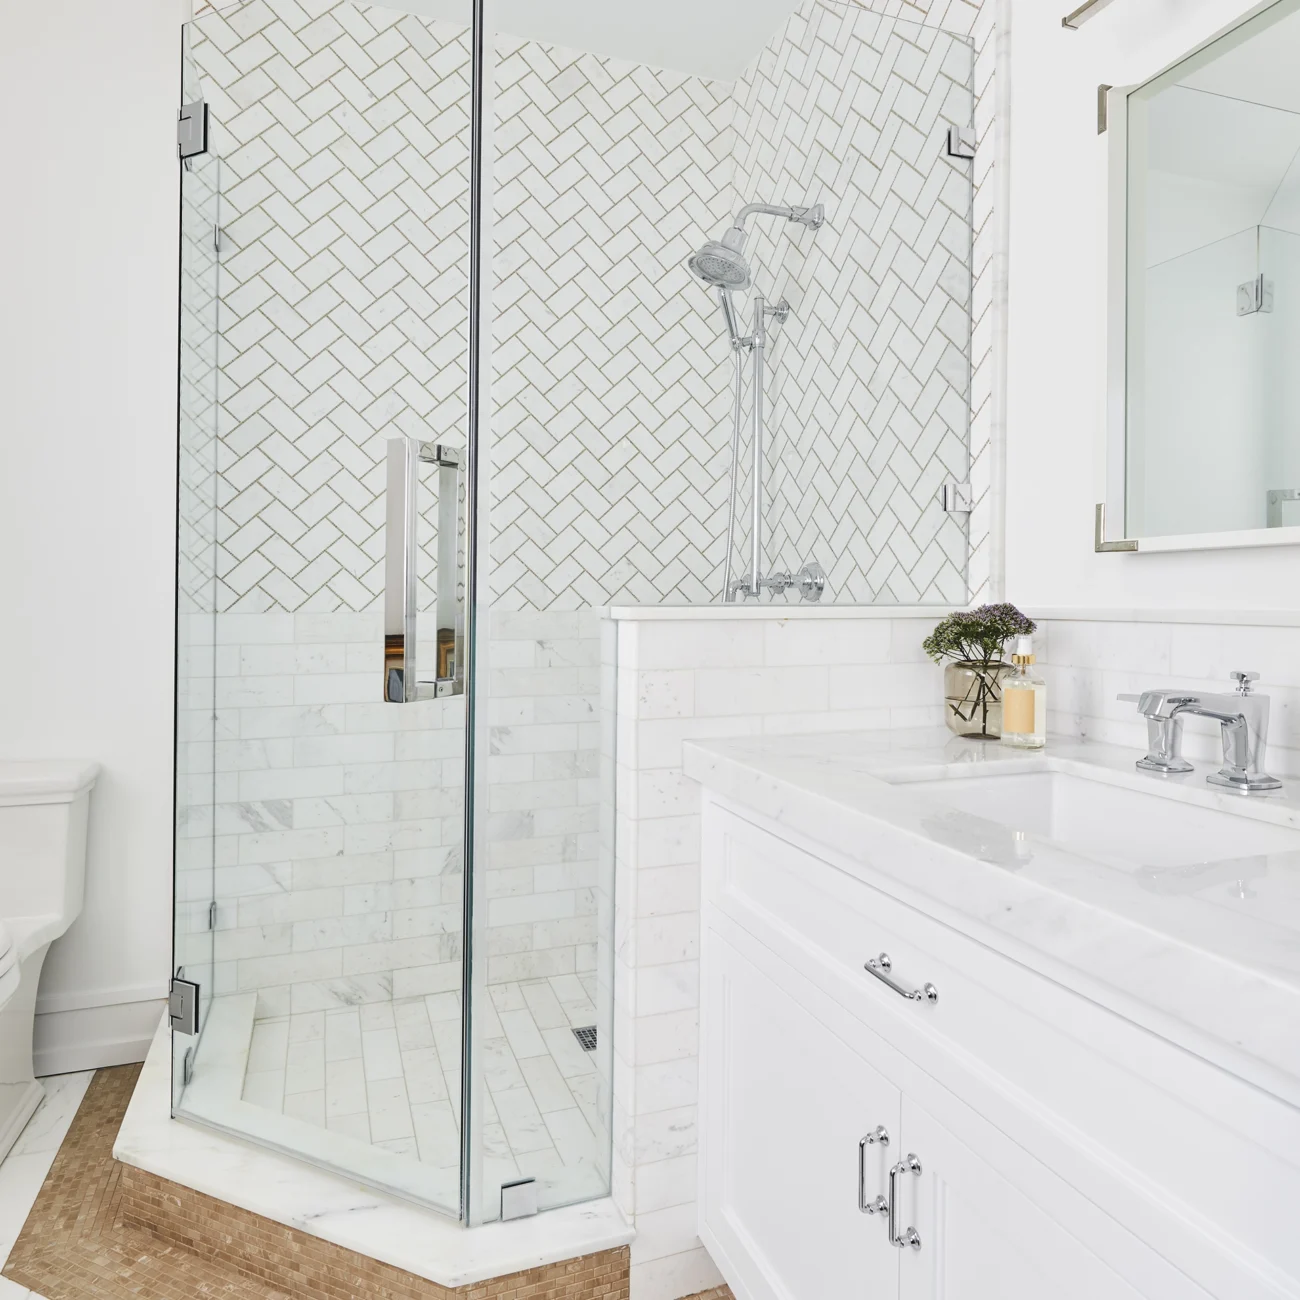 Christine Vroom-Interiors Thayer | Traditional bathroom with glass enclosed shower with Herringbone patterned tile